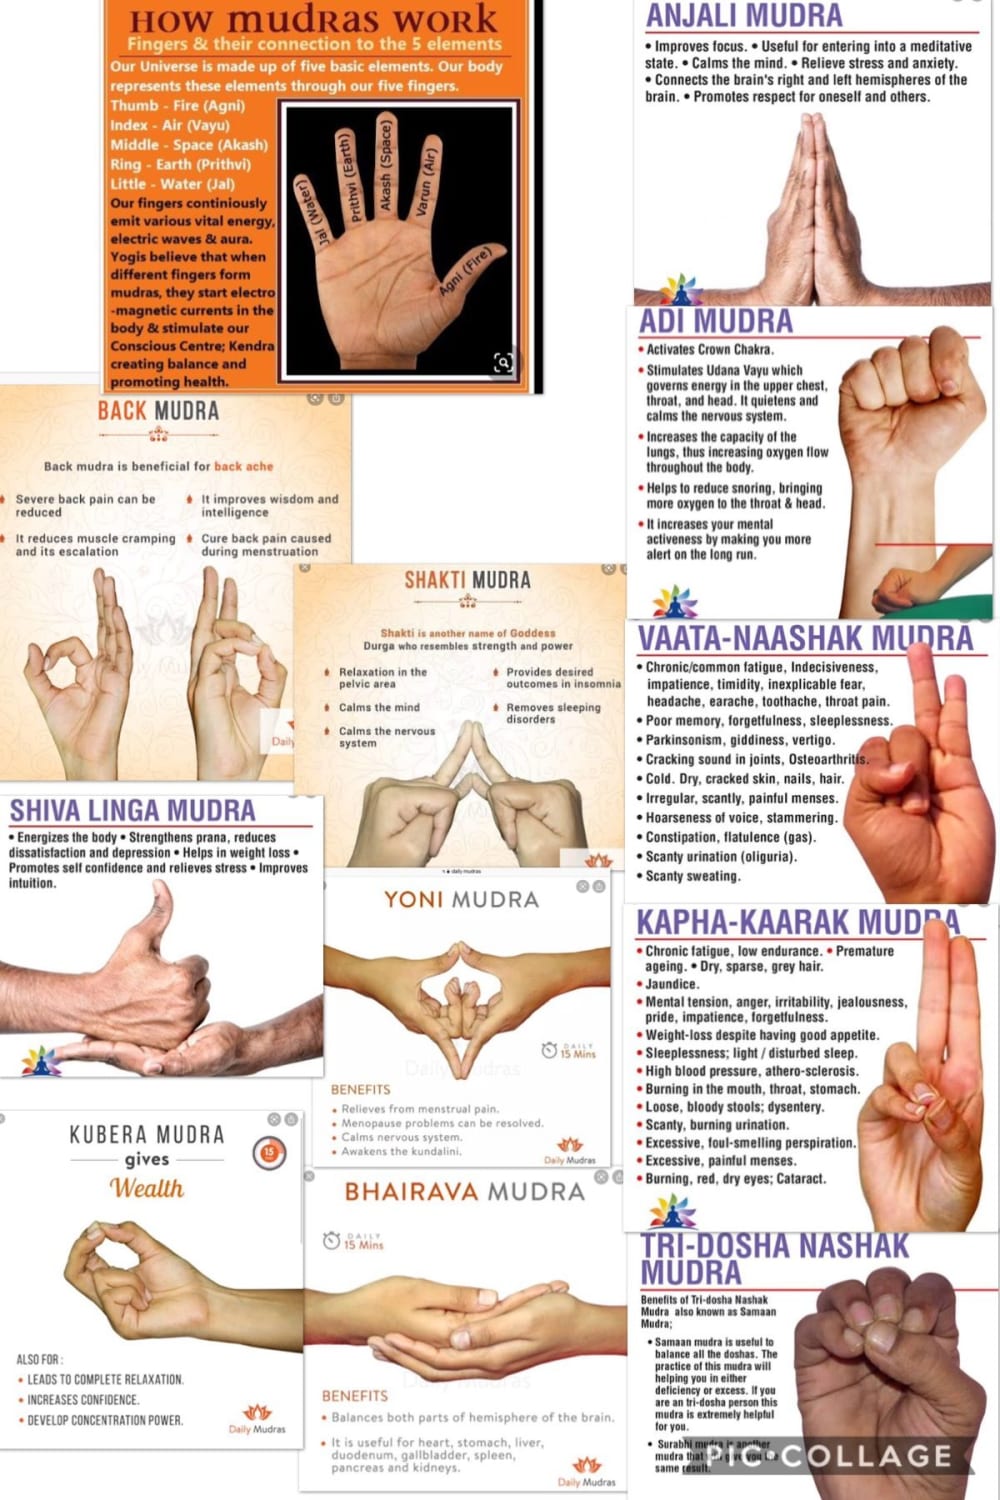 Pin by Claire Shaw on Japanese healing | Yoga facts, Healing yoga, Mudras